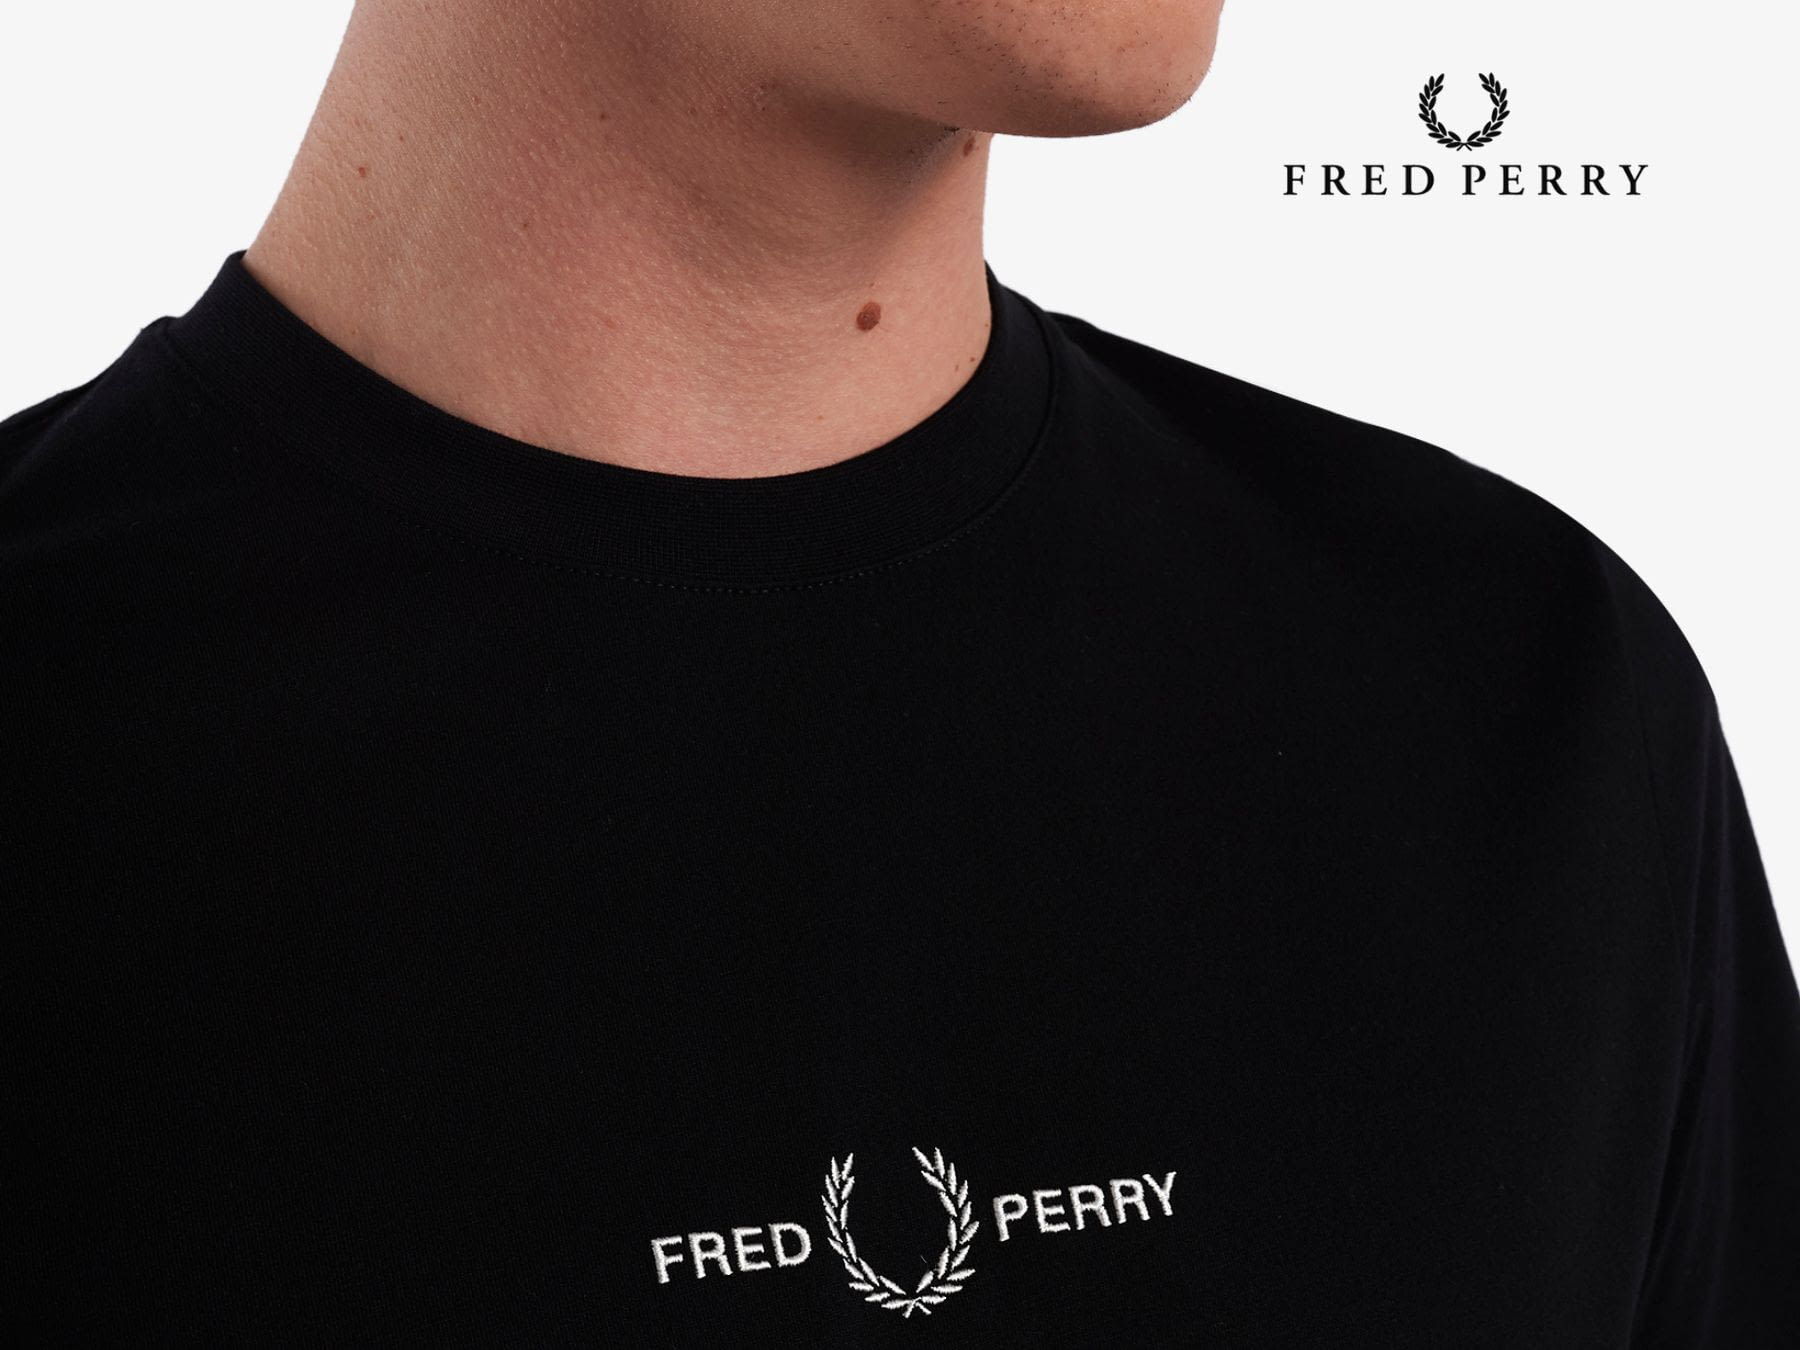 FRED PERRY abril 22